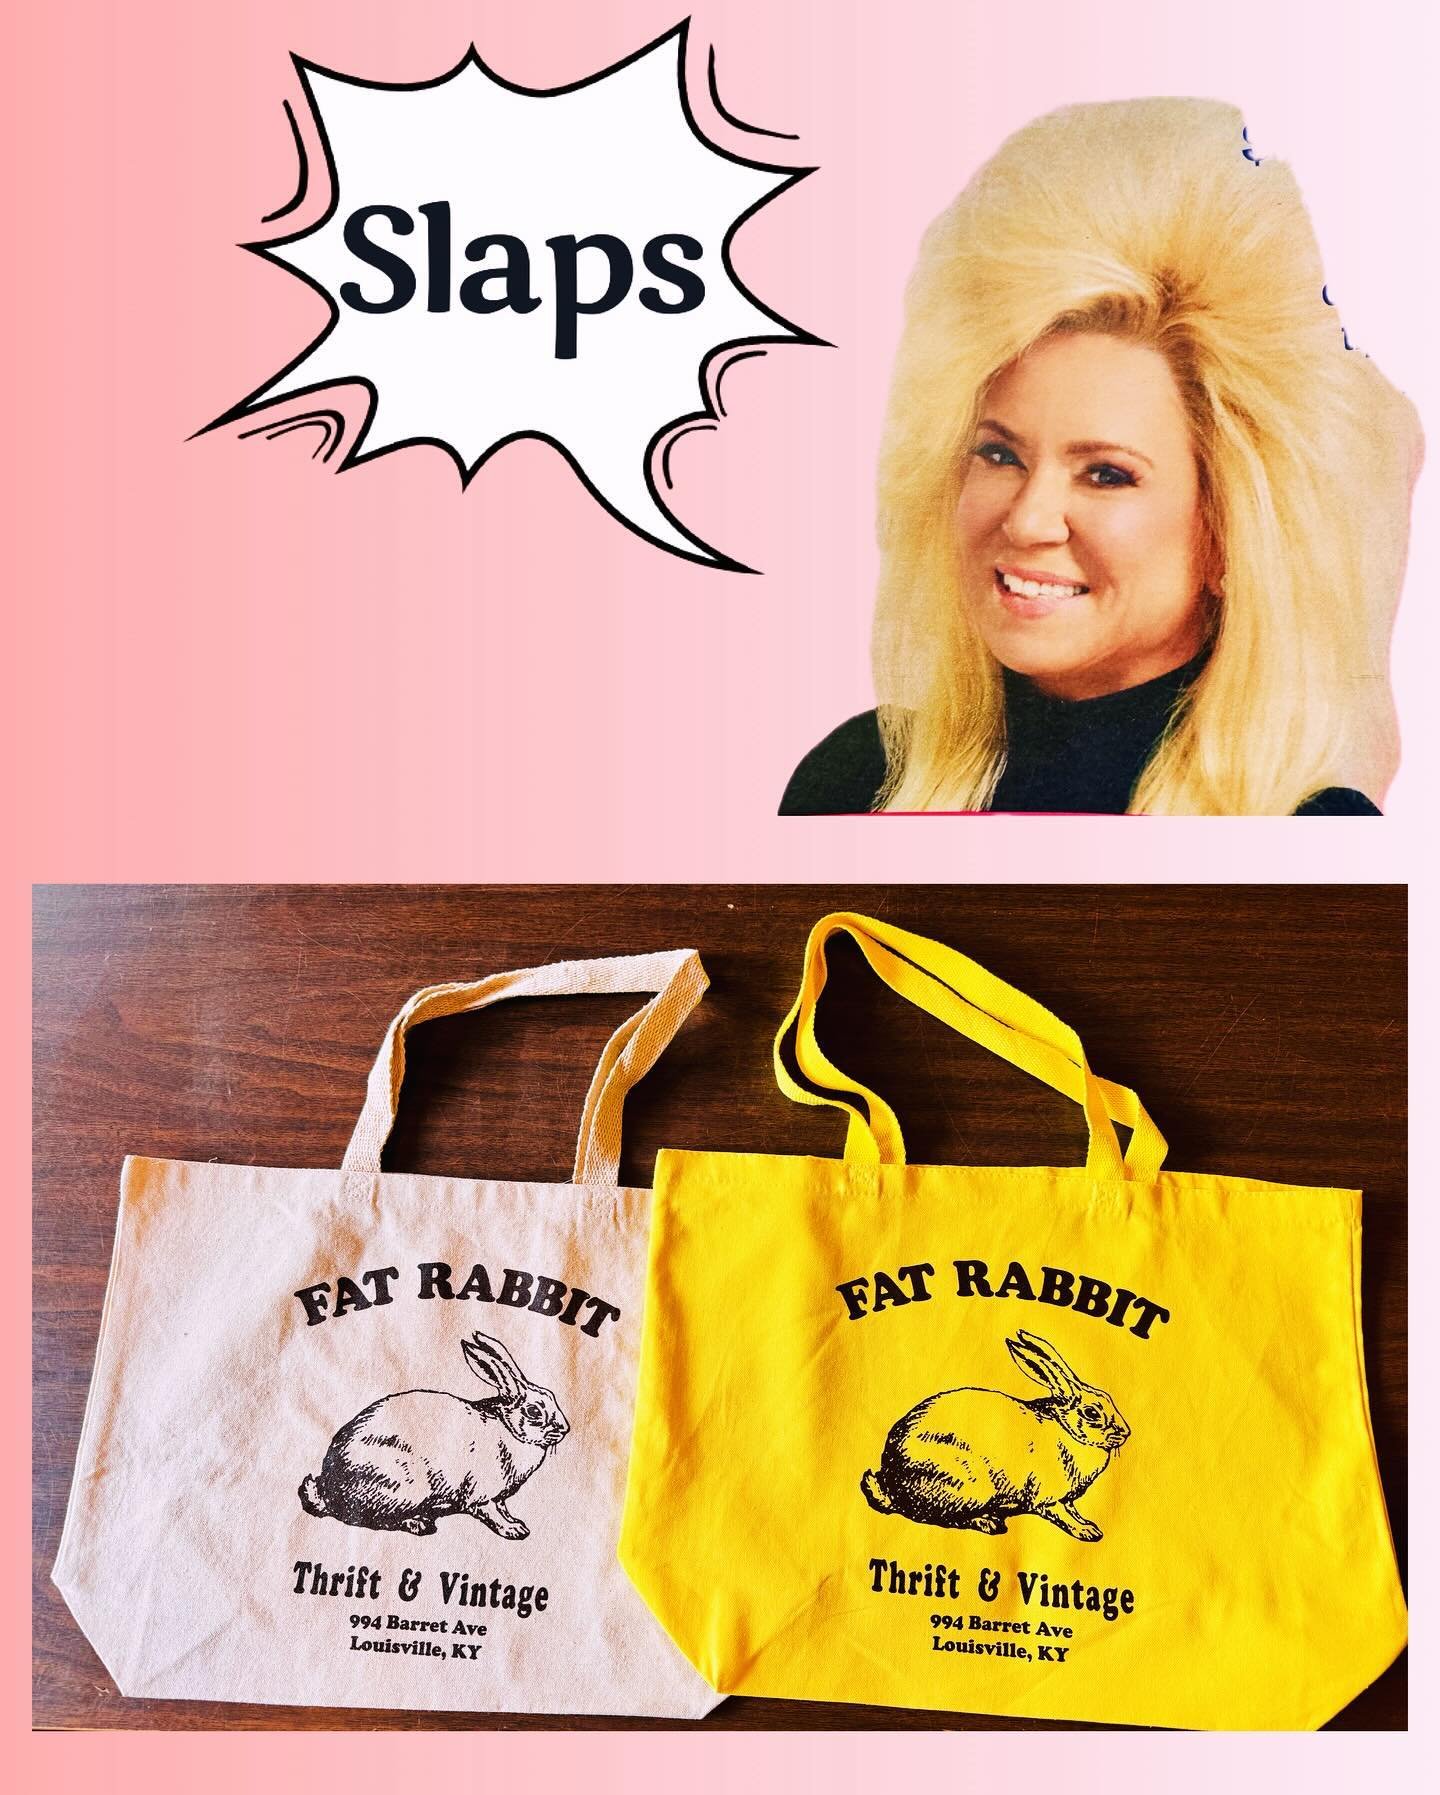 New canvas totes! Bigger and thicker than before! $10 (includes tax). 

#fatrabbitky #corporateswag #totebag